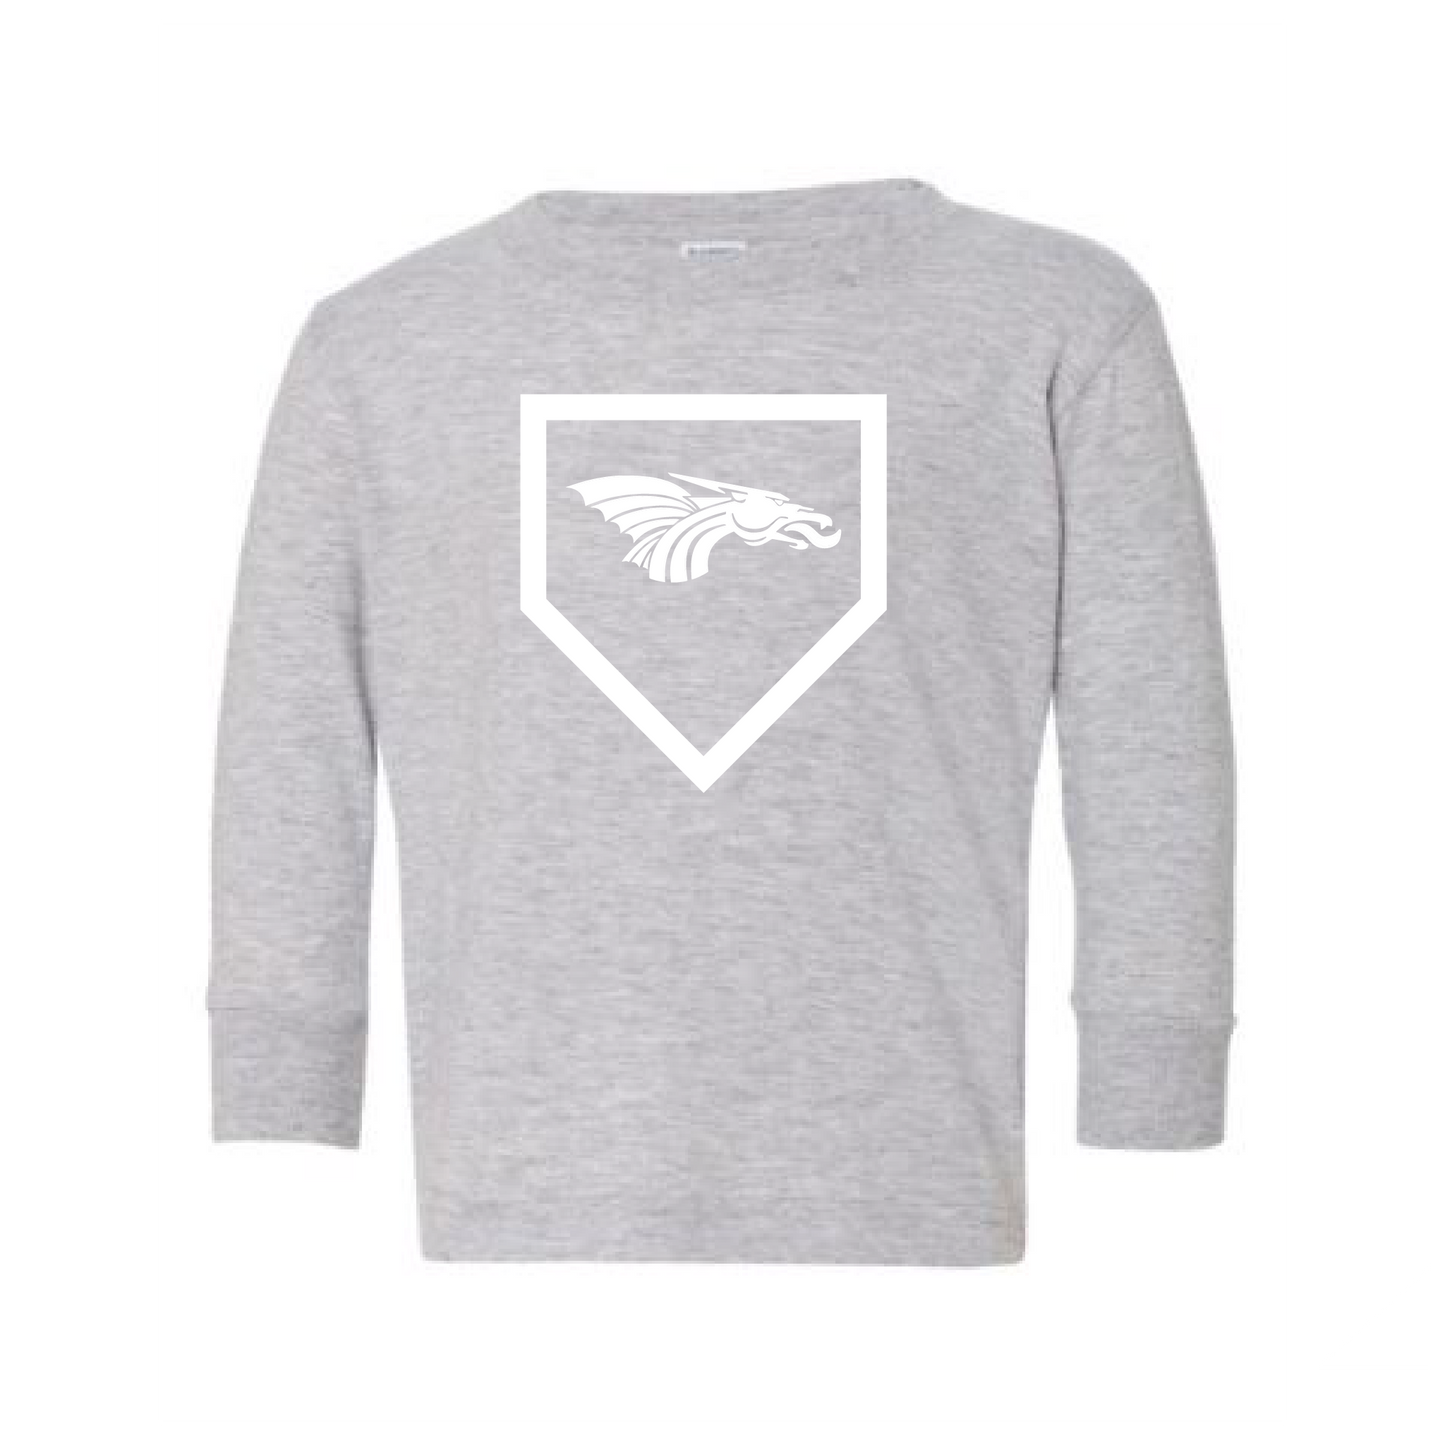 Toddler L/S T-shirt:  Home Plate Dragons Logo